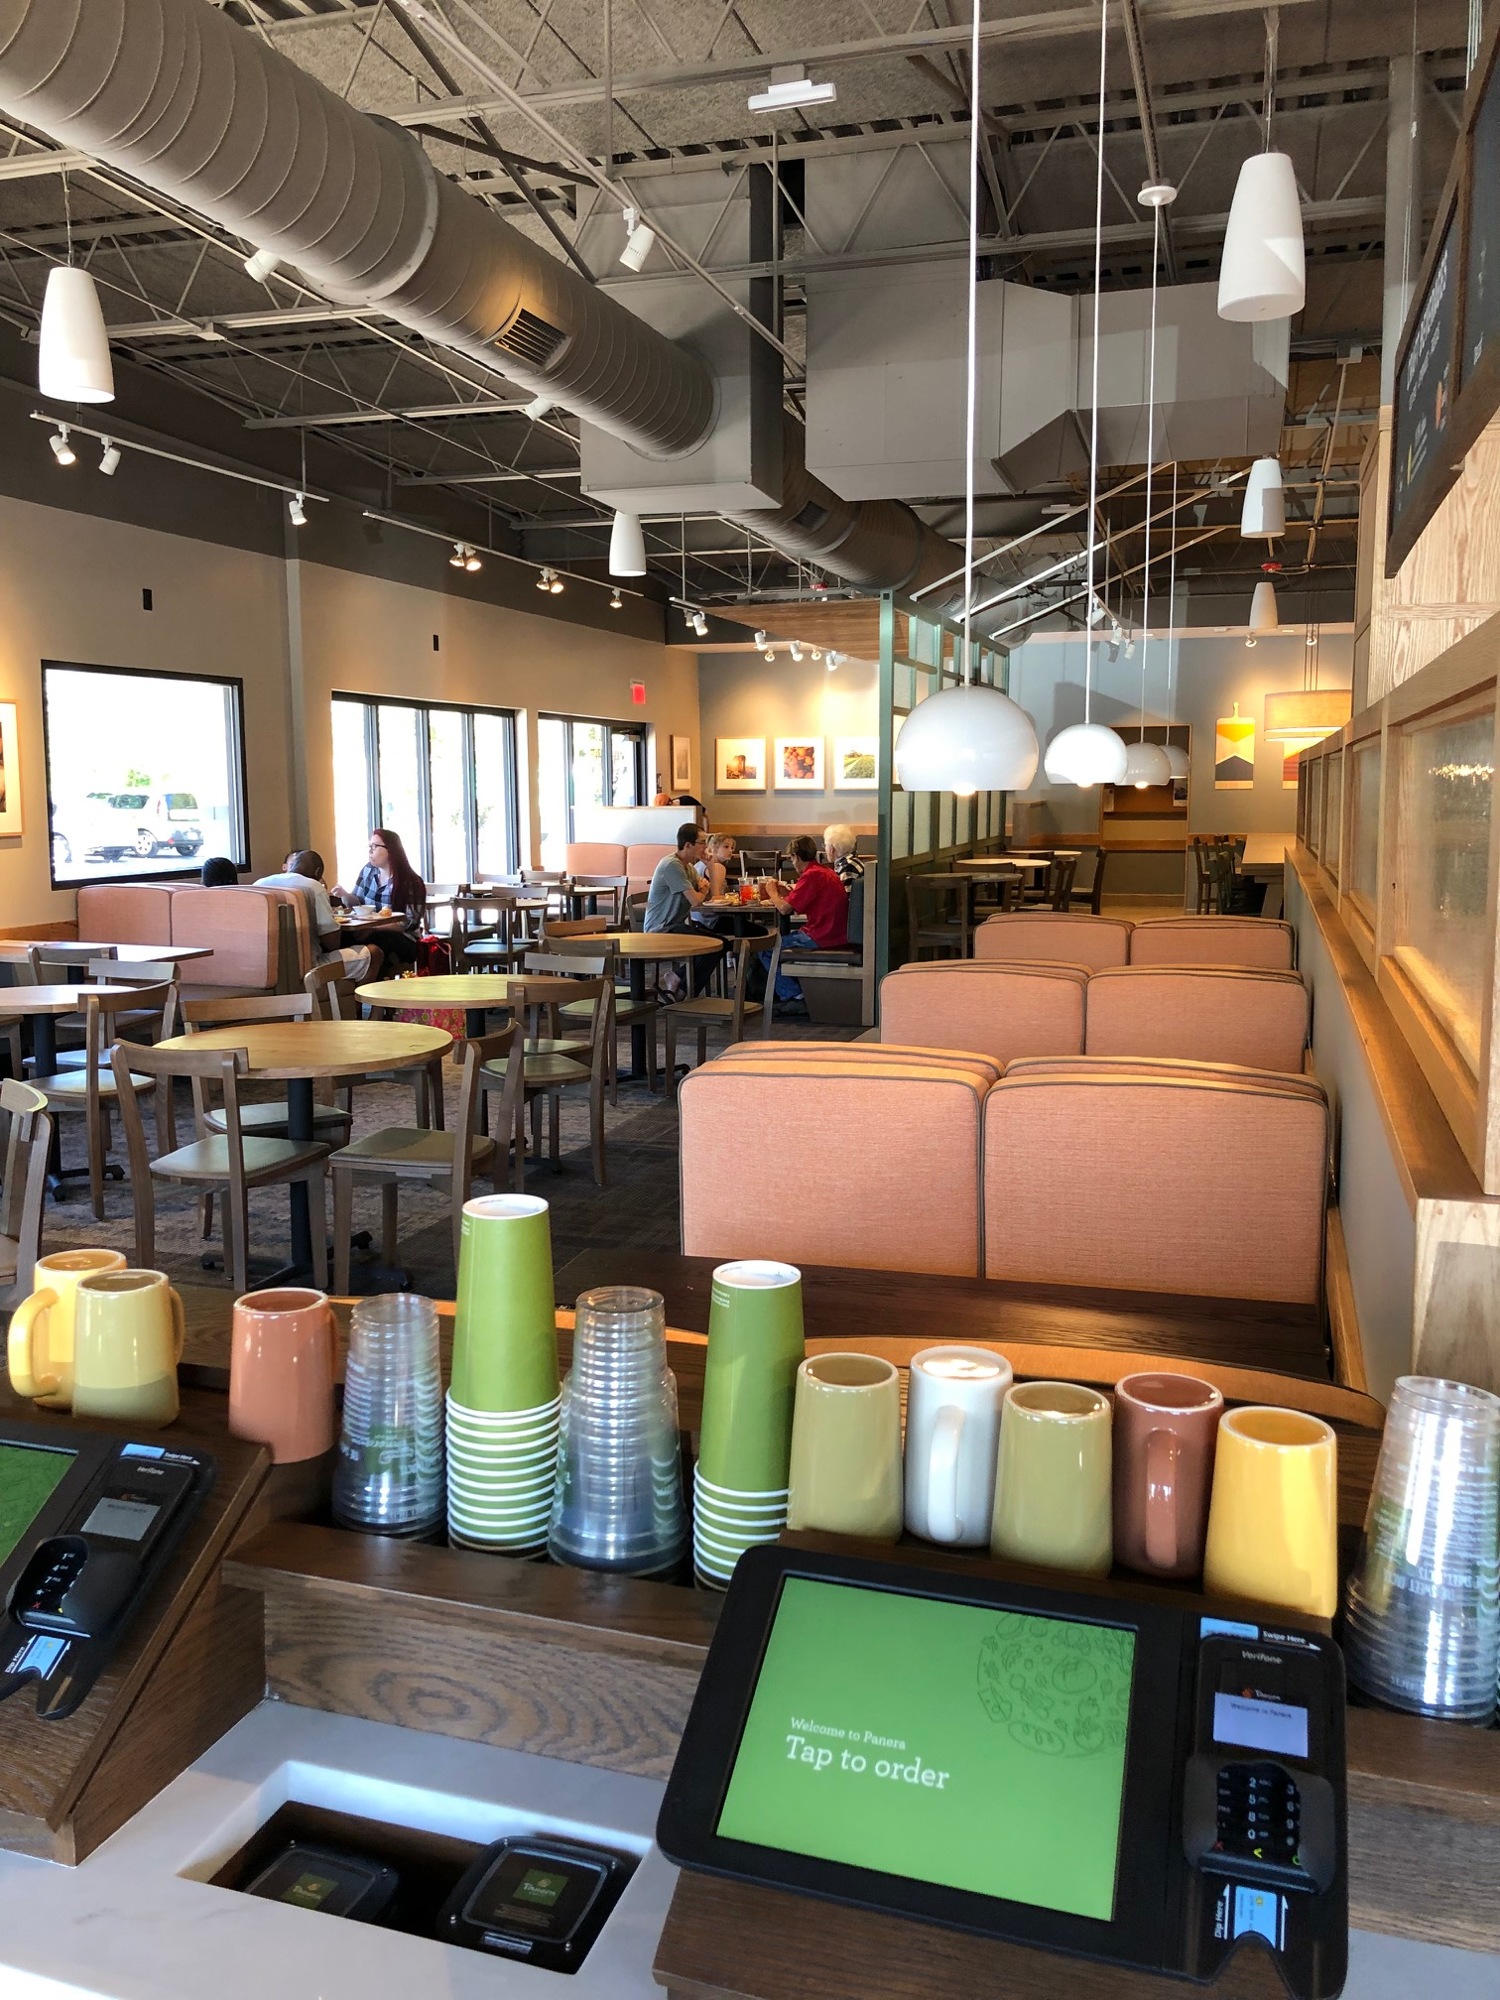 Panera Bread renovated the interior of the former Applebee’s and added a drive-thru.